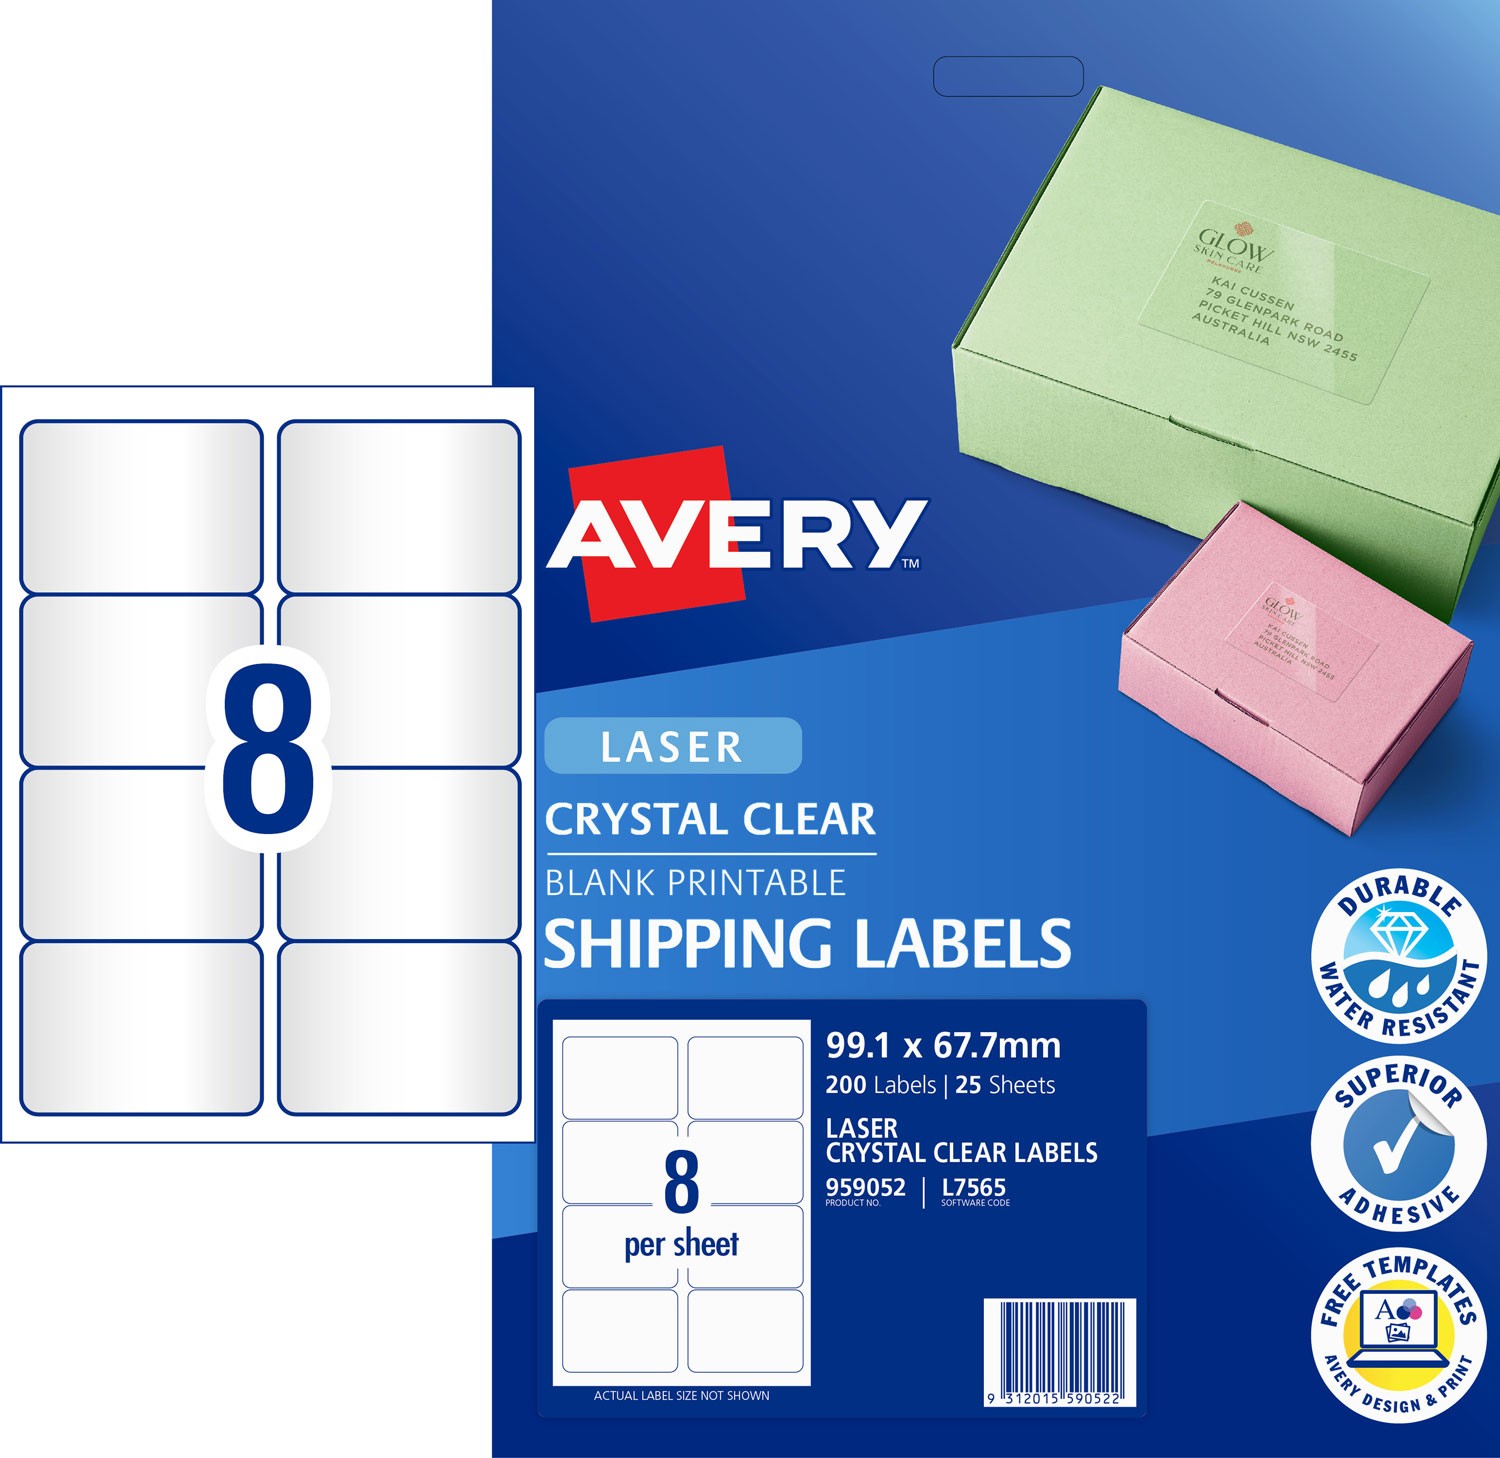 Crystal Clear Shipping Labels 959052 Avery Australia